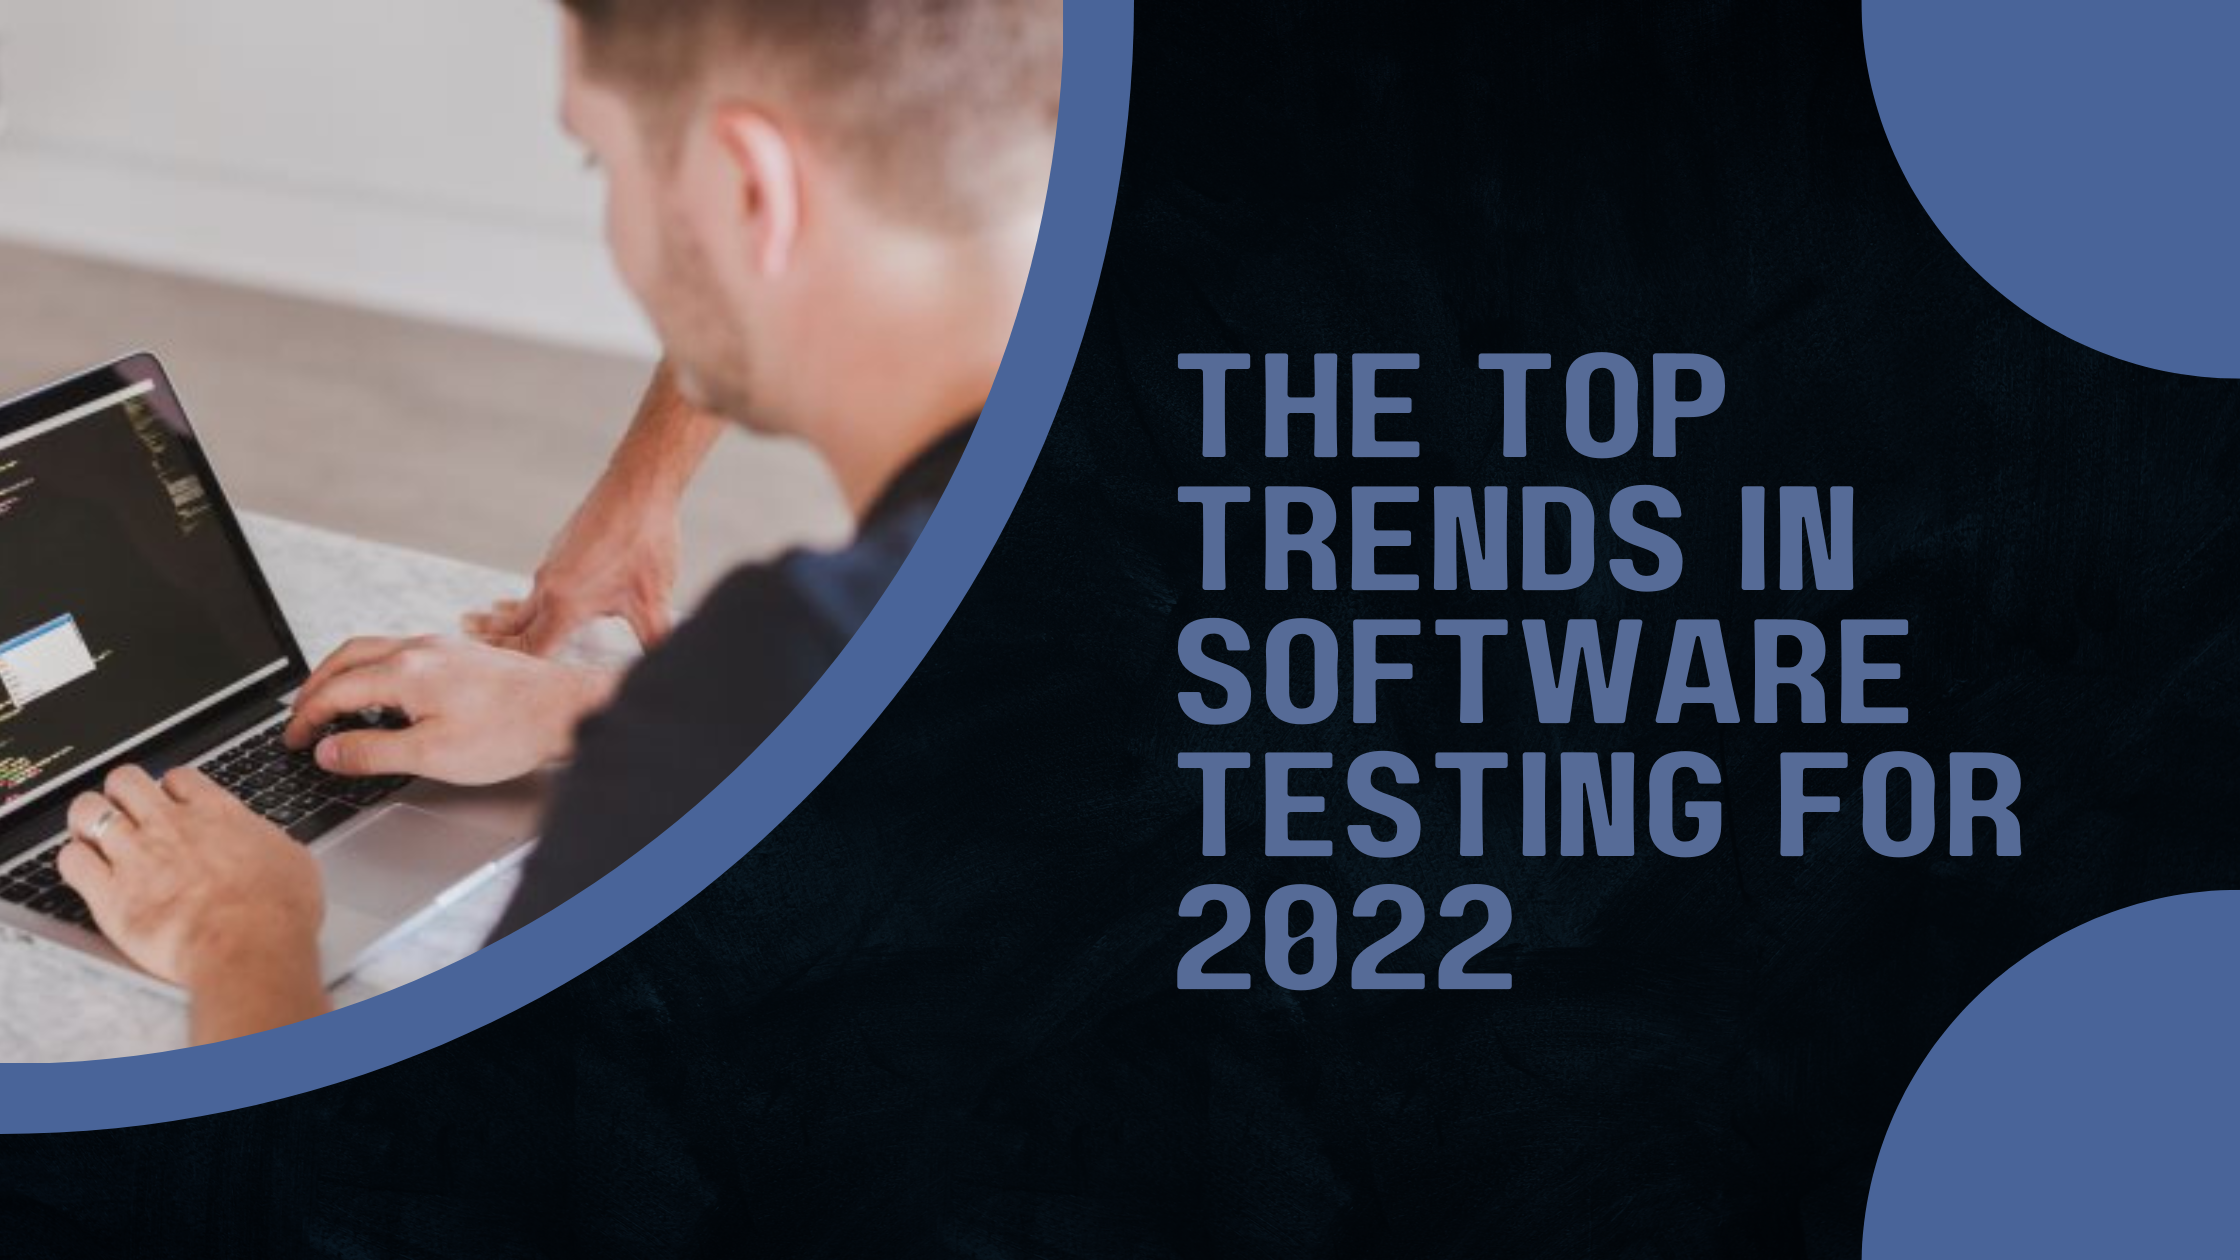 The Top Trends in Software Testing for 2022: